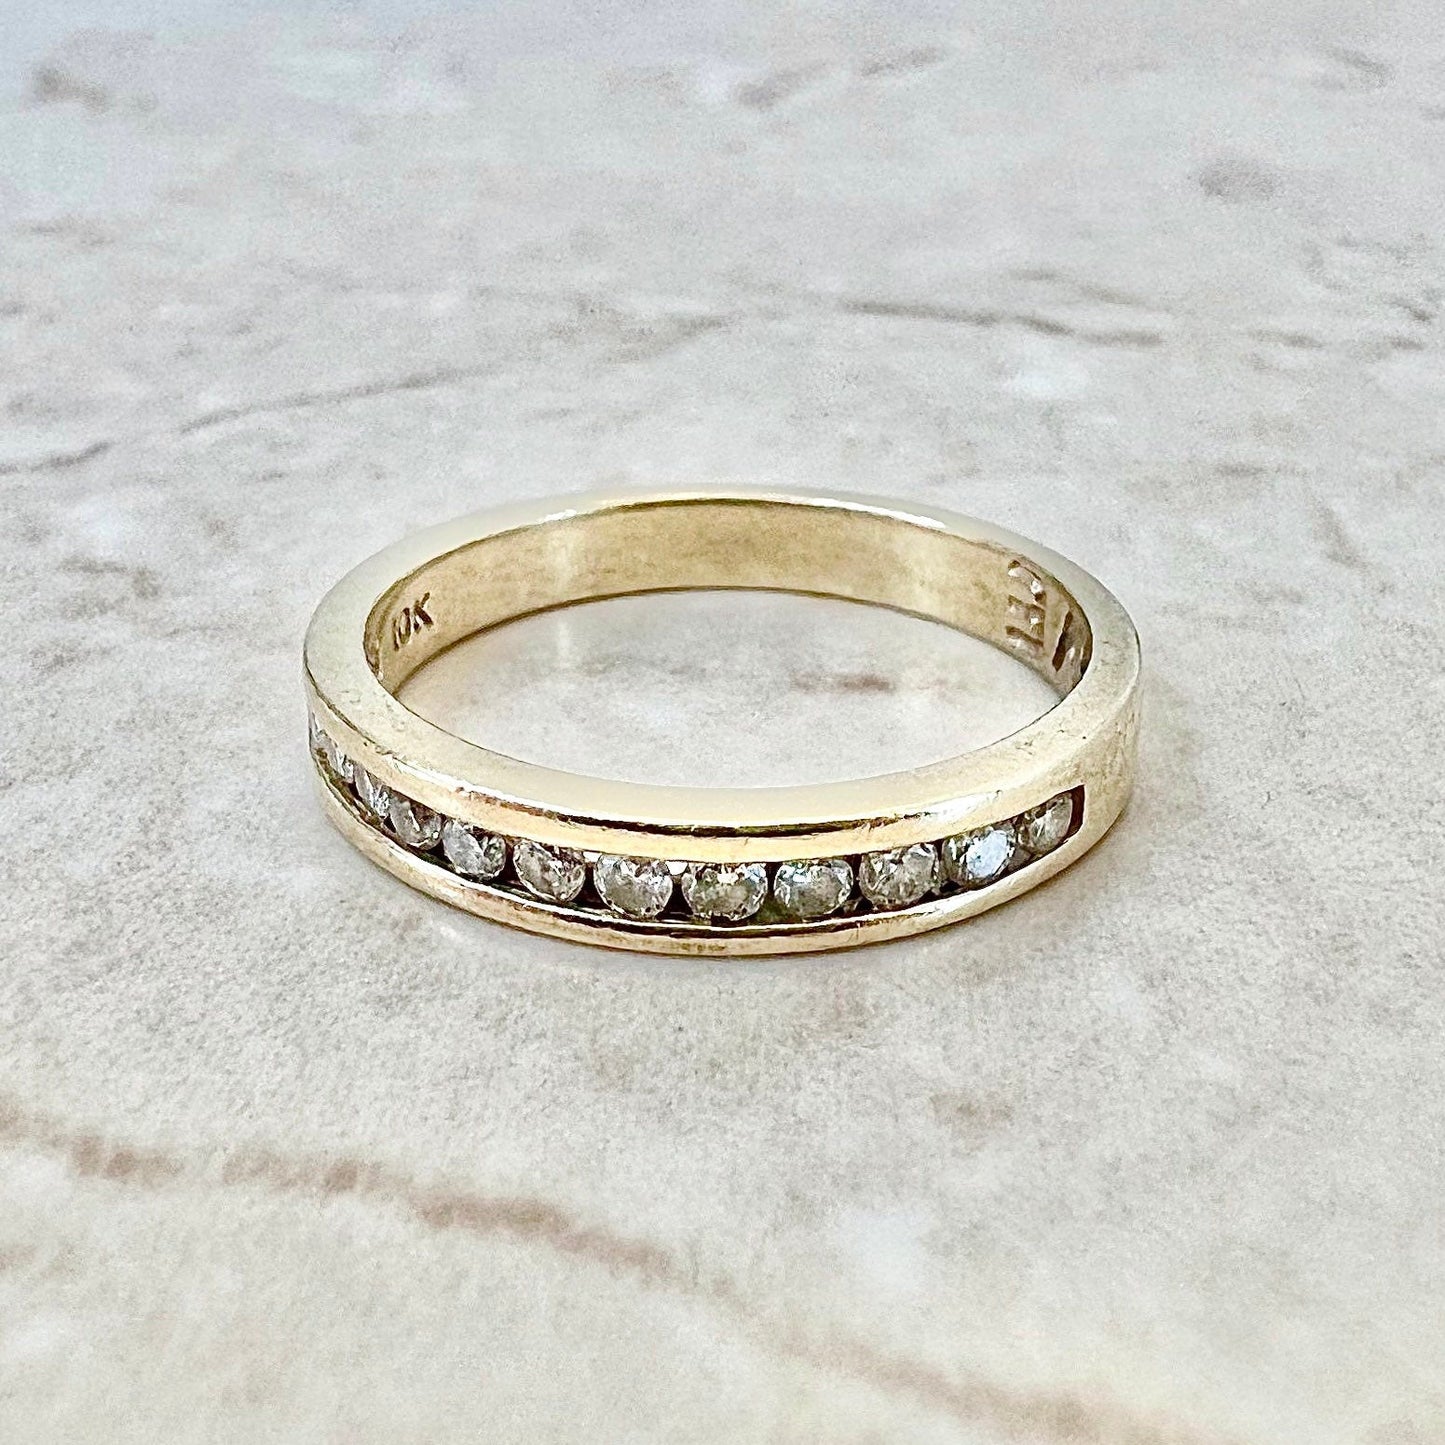 10K Half Eternity Diamond Band Ring - Yellow Gold Wedding Band - Channel Set Band - Anniversary Ring - Birthday Gift - Best Gift For Her